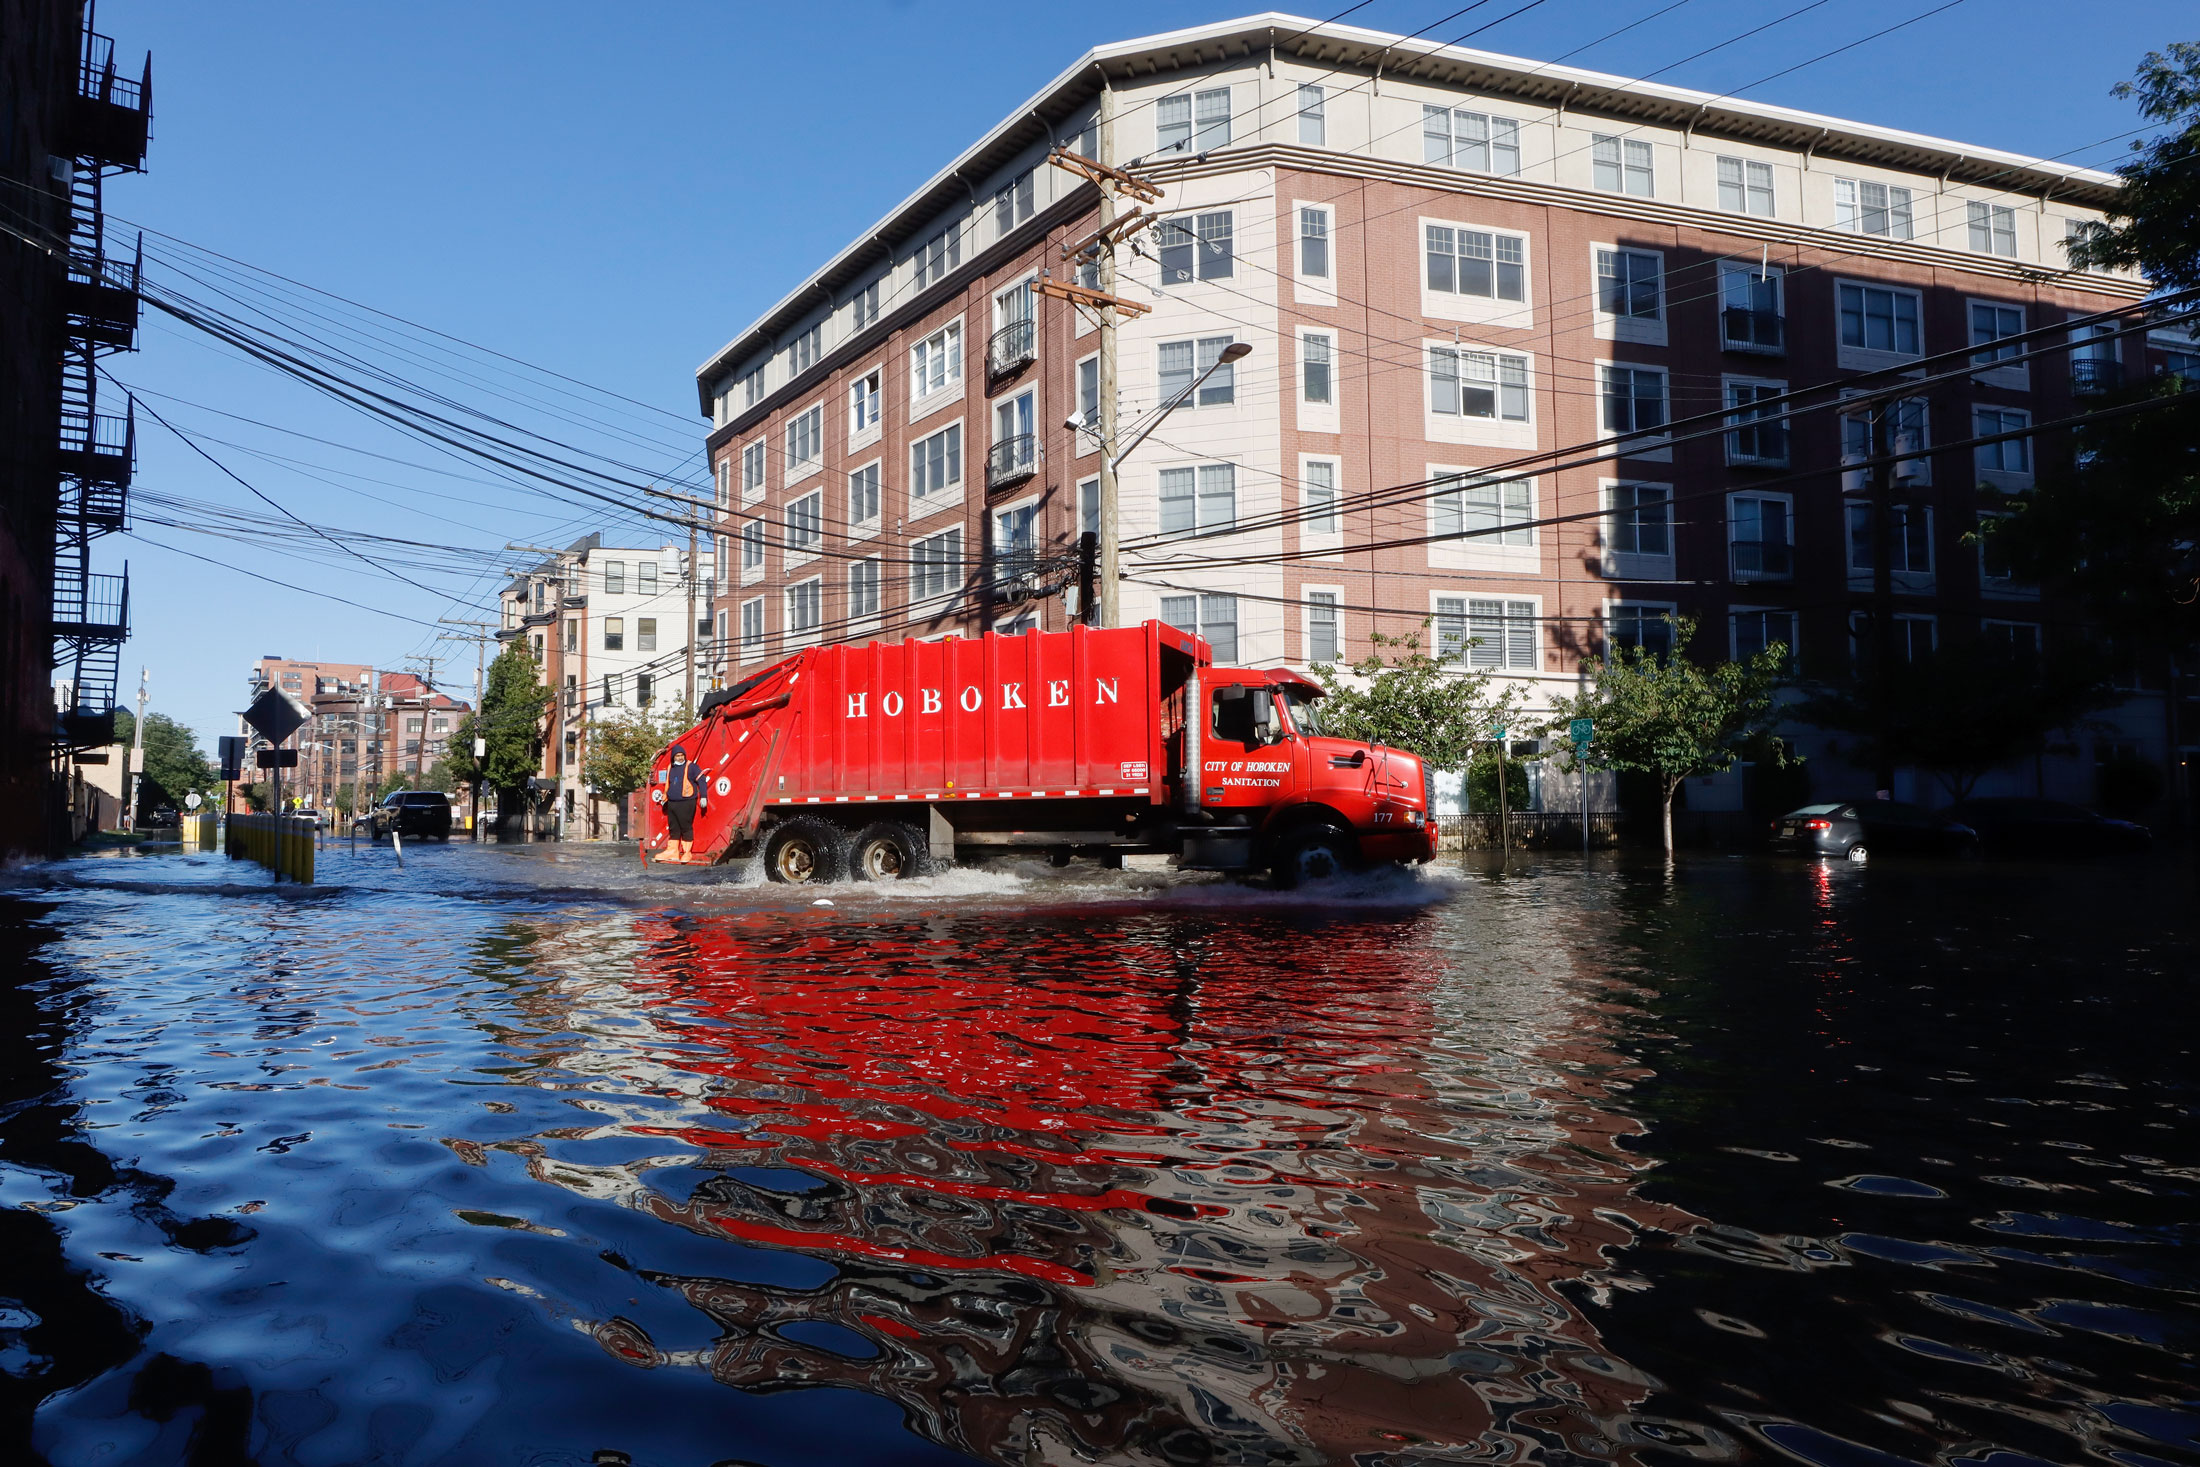 A sanitation truck drives through a flooded street in Hoboken&nbsp;the morning after&nbsp;remnants of Hurricane Ida drenched the New York City and New Jersey area in 2021.